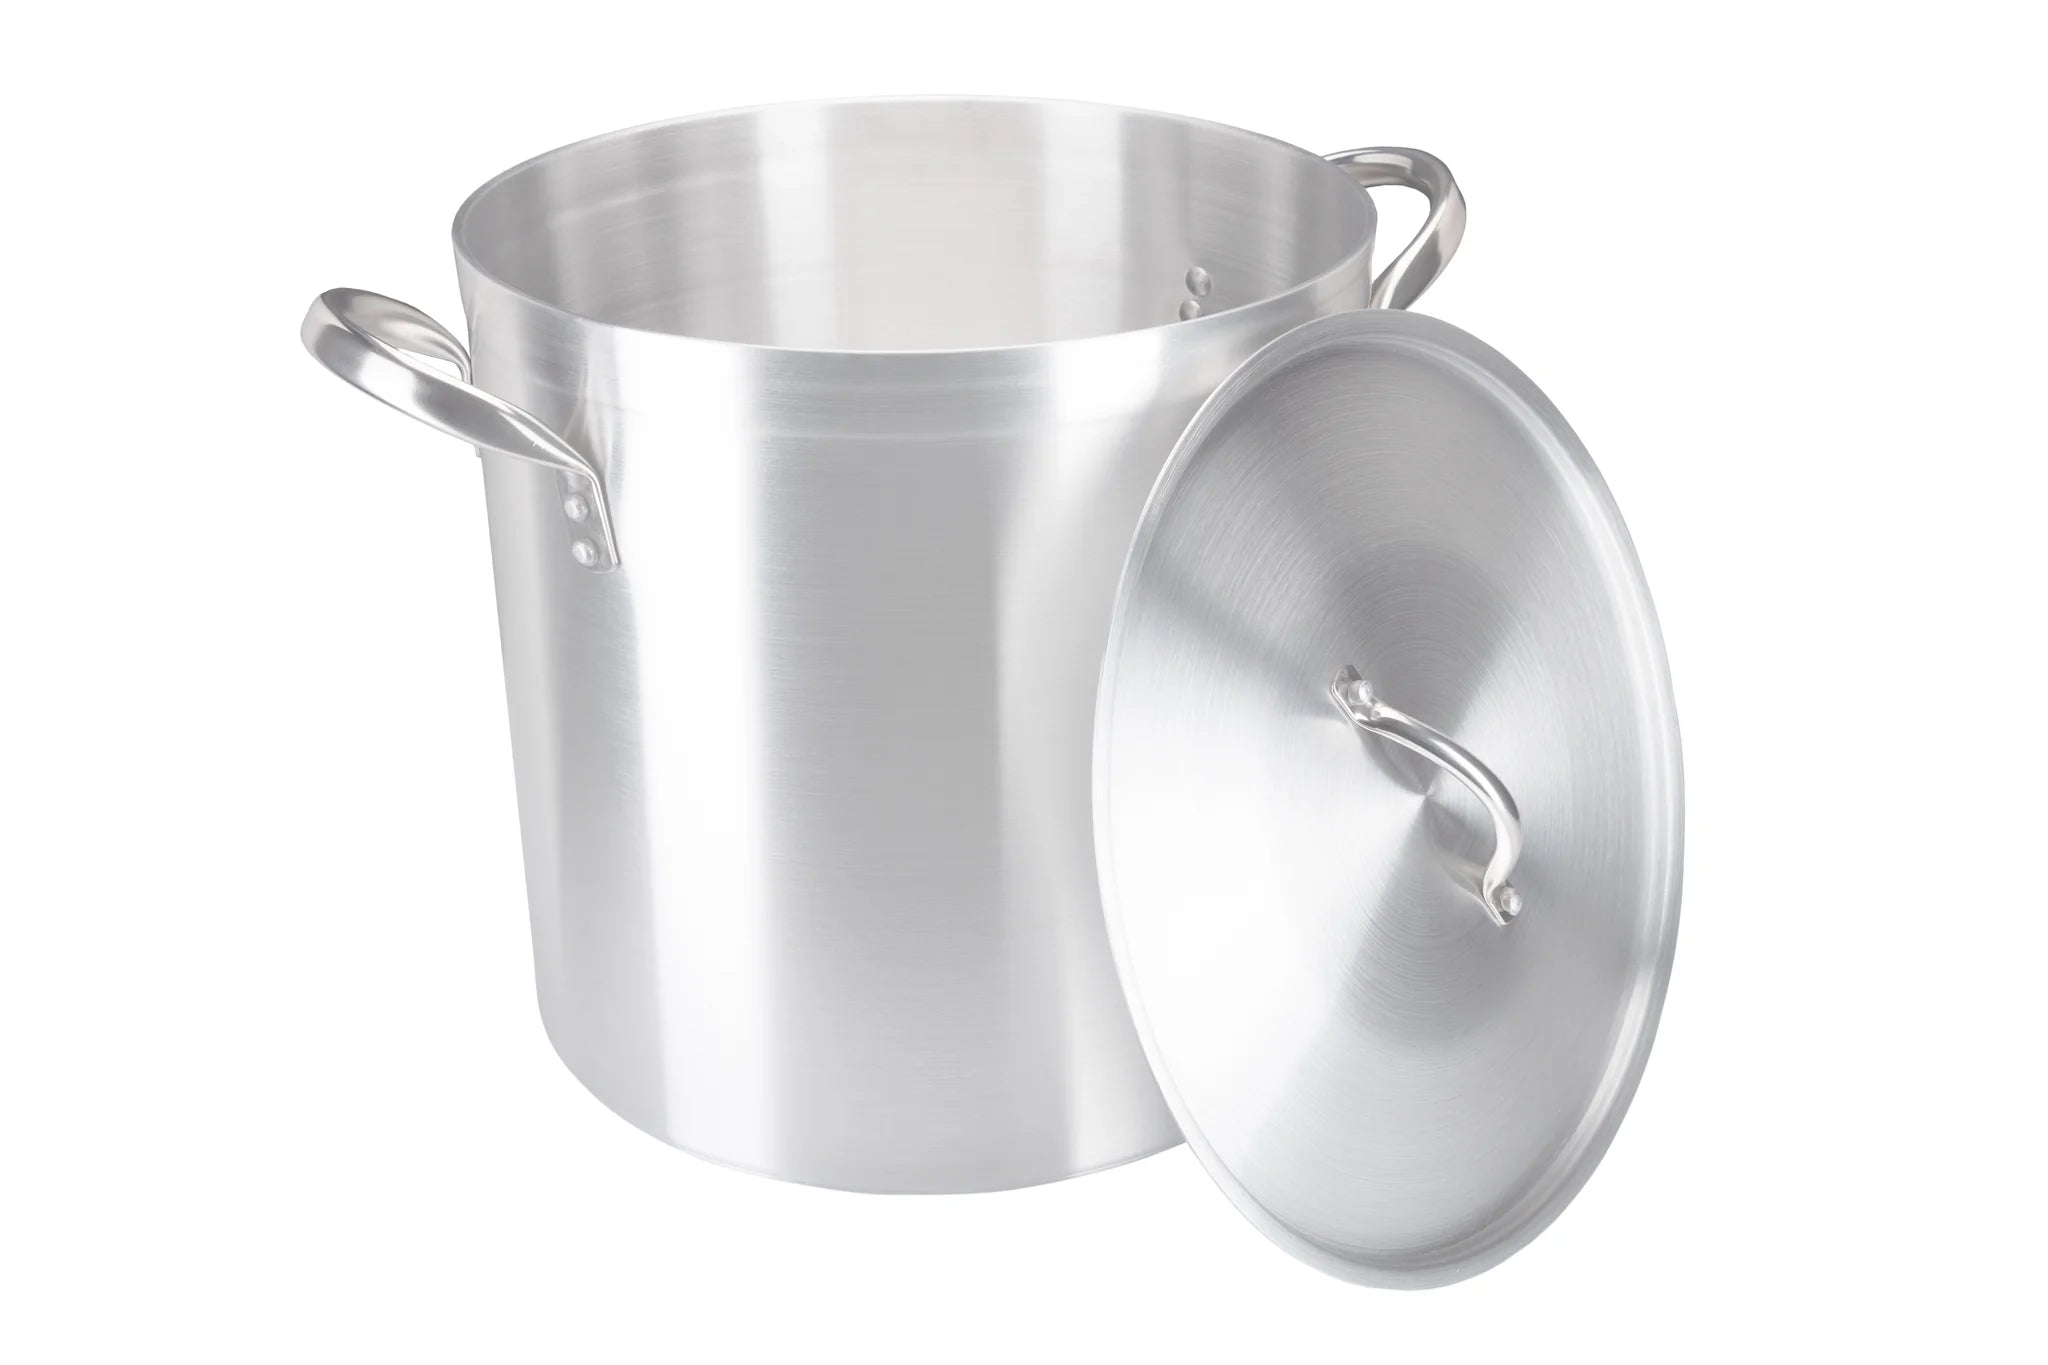 40cm Aluminium 49 LITRE Stockpot.Product Ref:00829. IN STOCK -🚚 1-3 Days Delivery